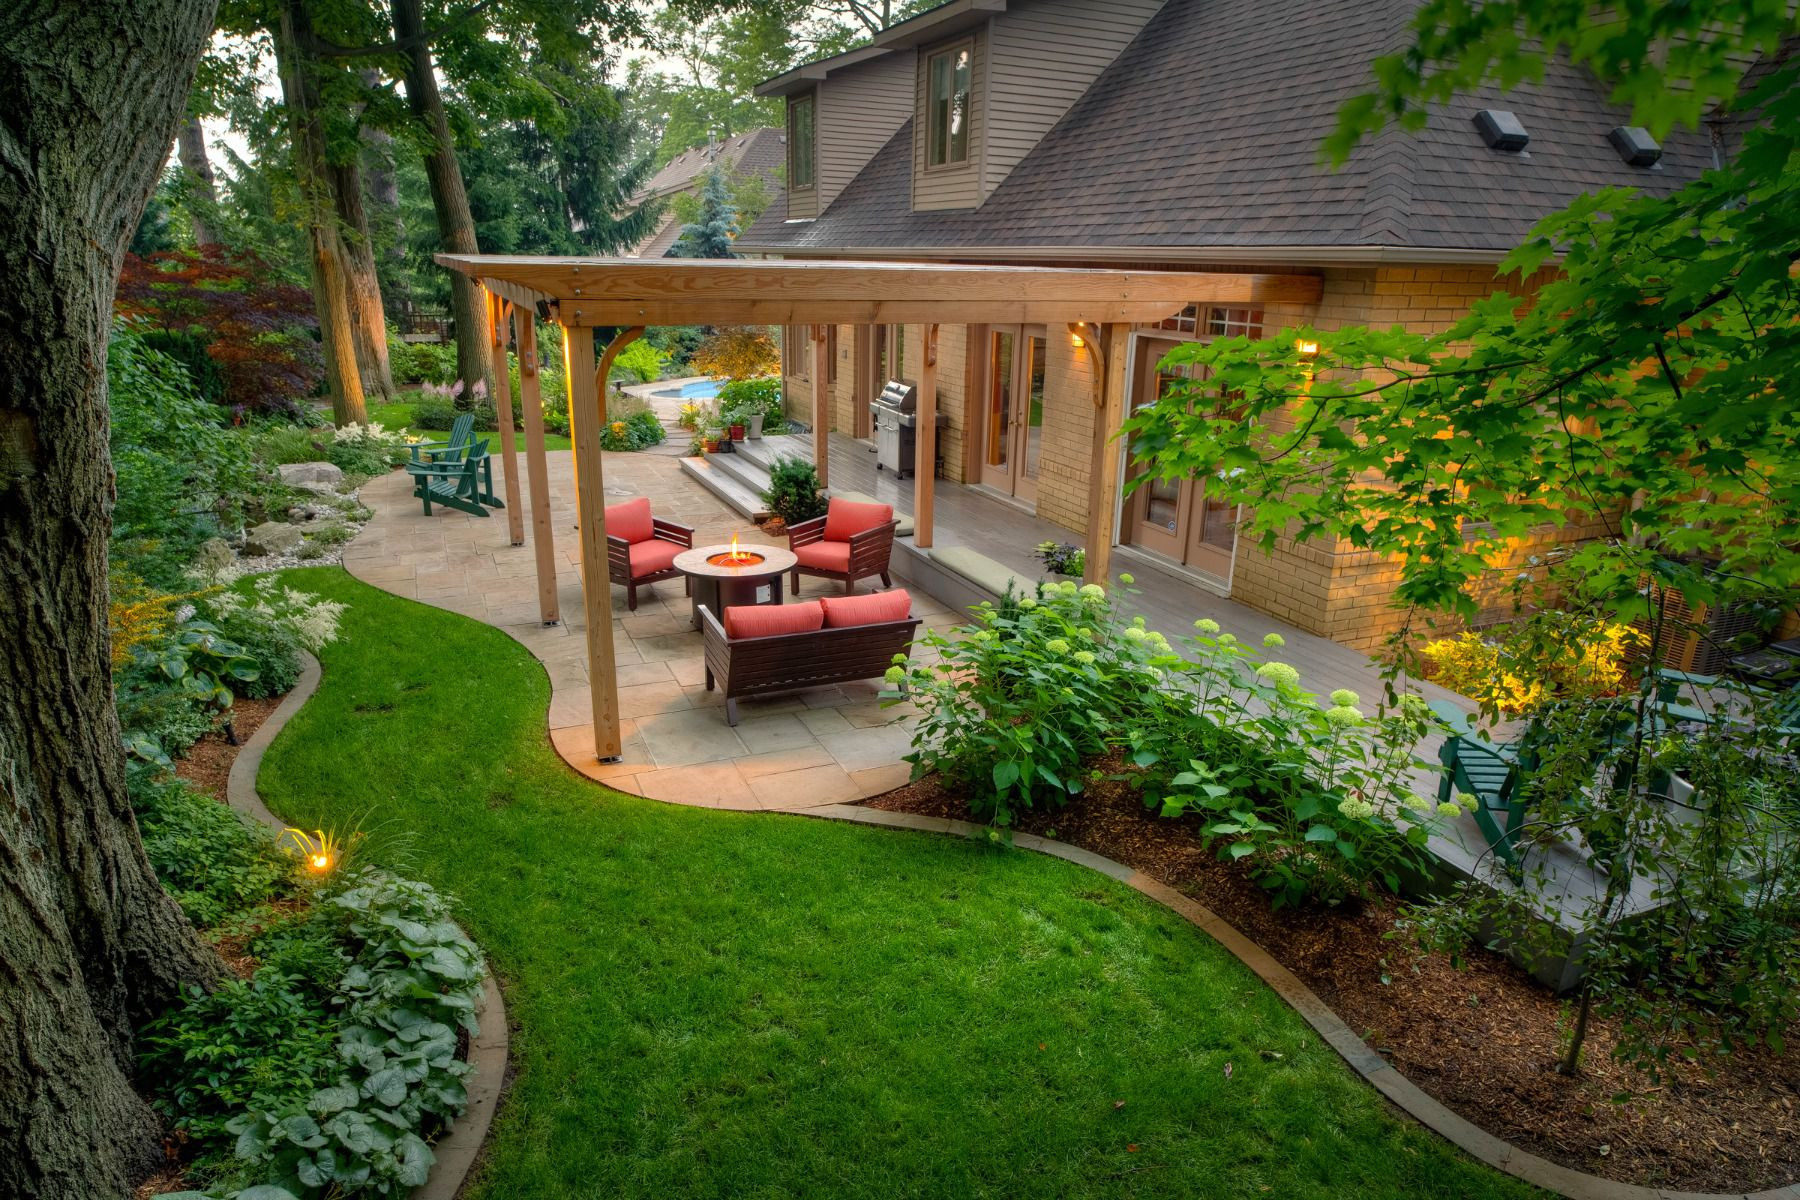 Landscaping Around Patio
 50 Backyard Landscaping Ideas to Inspire You